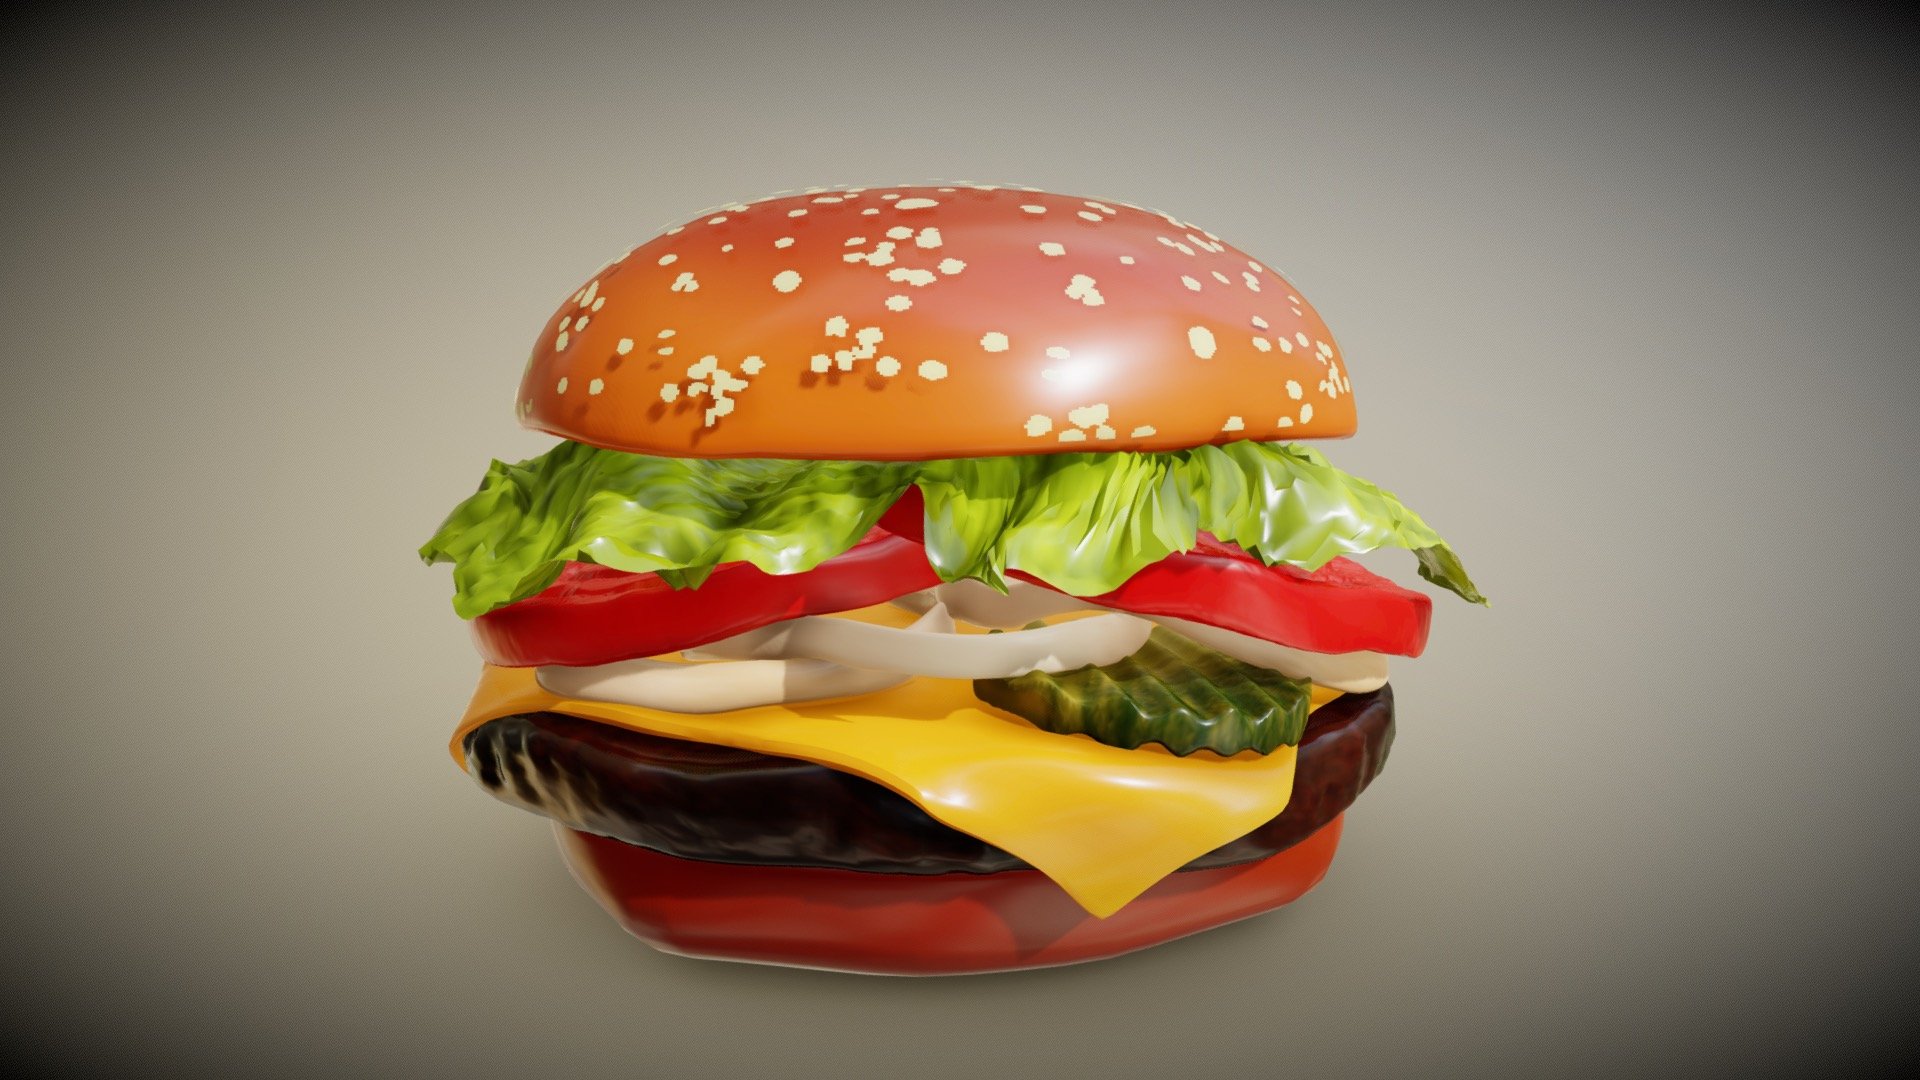 This 3D model of a hamburger is inspired by the famous Burger King Whopper, complete with all the fixings, including fresh onions. The burger patty is perfectly cooked to a juicy medium-rare, with melted cheese oozing over the sides. It's topped with fresh lettuce, ripe tomato slices, crunchy pickles, and savory onions, all nestled between two fluffy sesame seed buns.

Whether you're a 3D artist looking to add a realistic touch to a food-related project or a marketing professional in the fast-food industry, this Hamburger in the style of a Burger King Whopper 3D model is a must-have 3d model